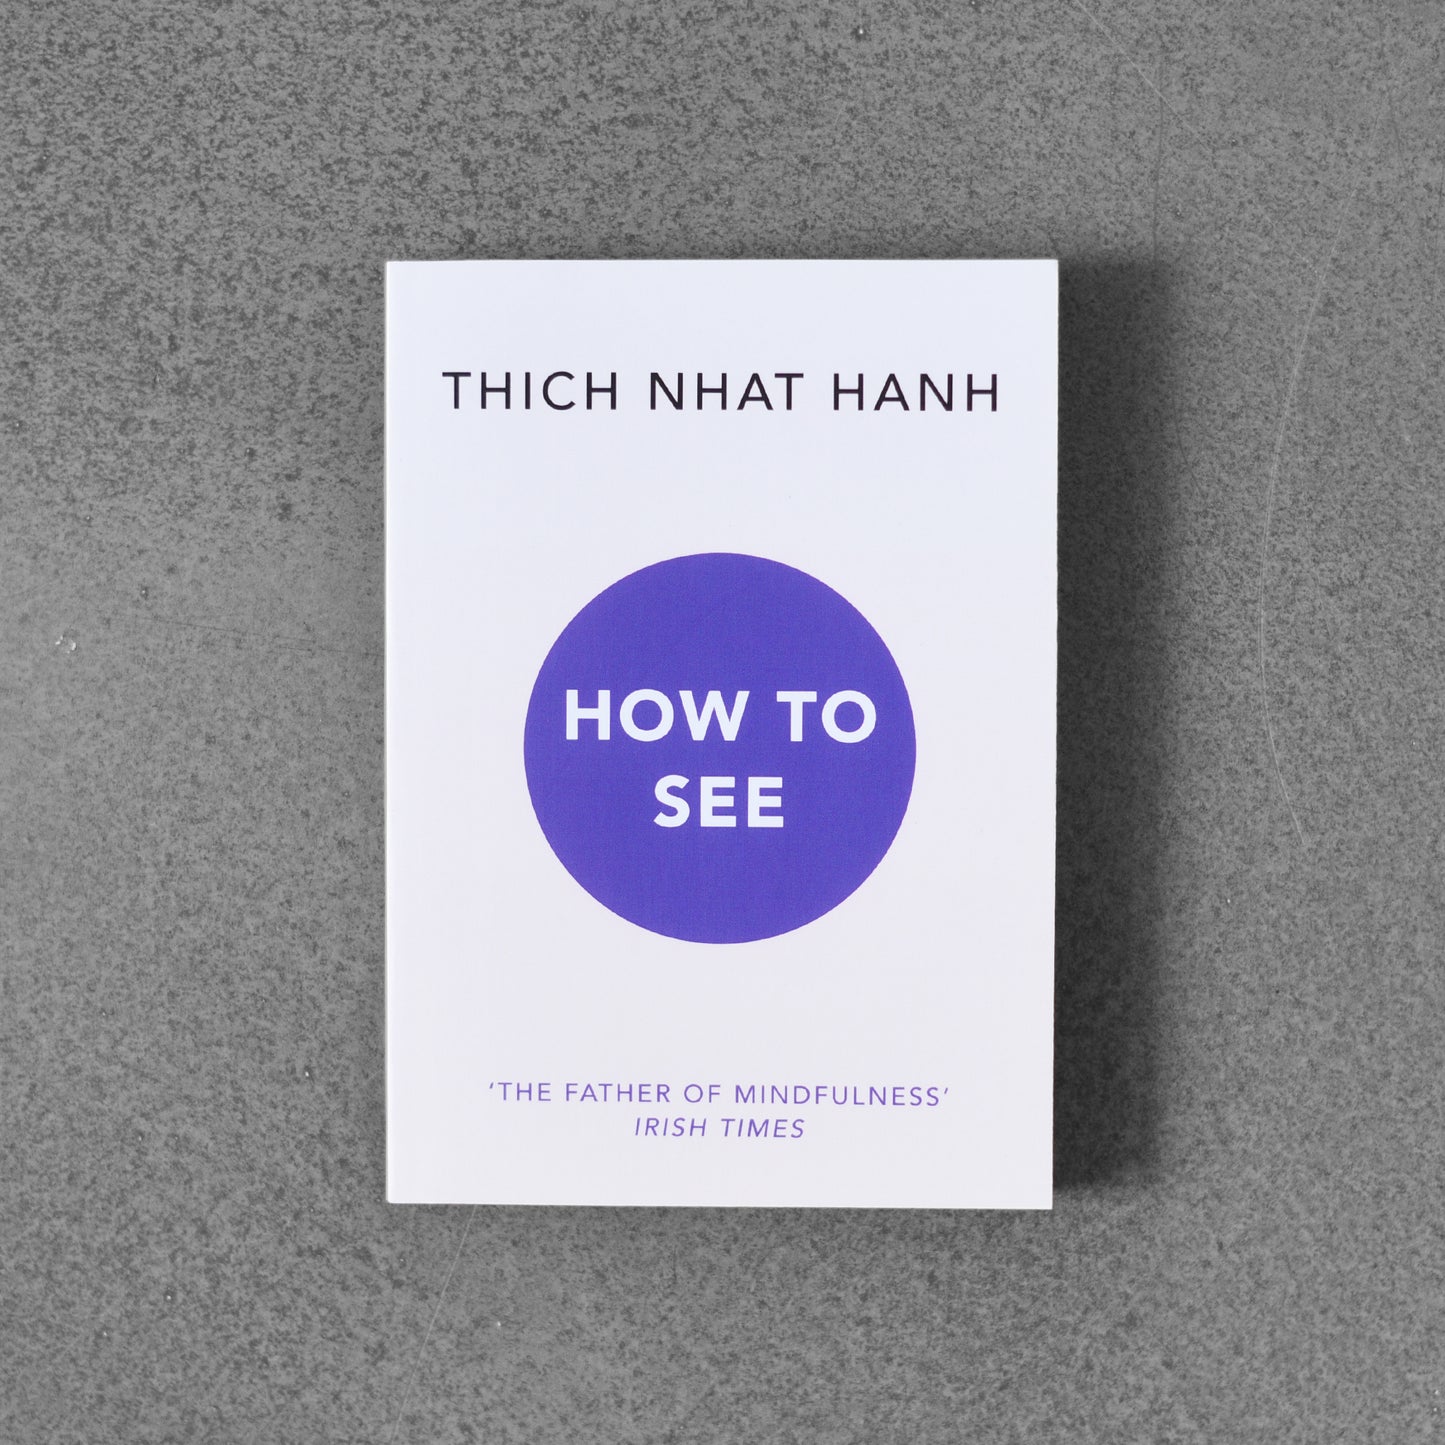 How to See - Thinch Nhat Hanh